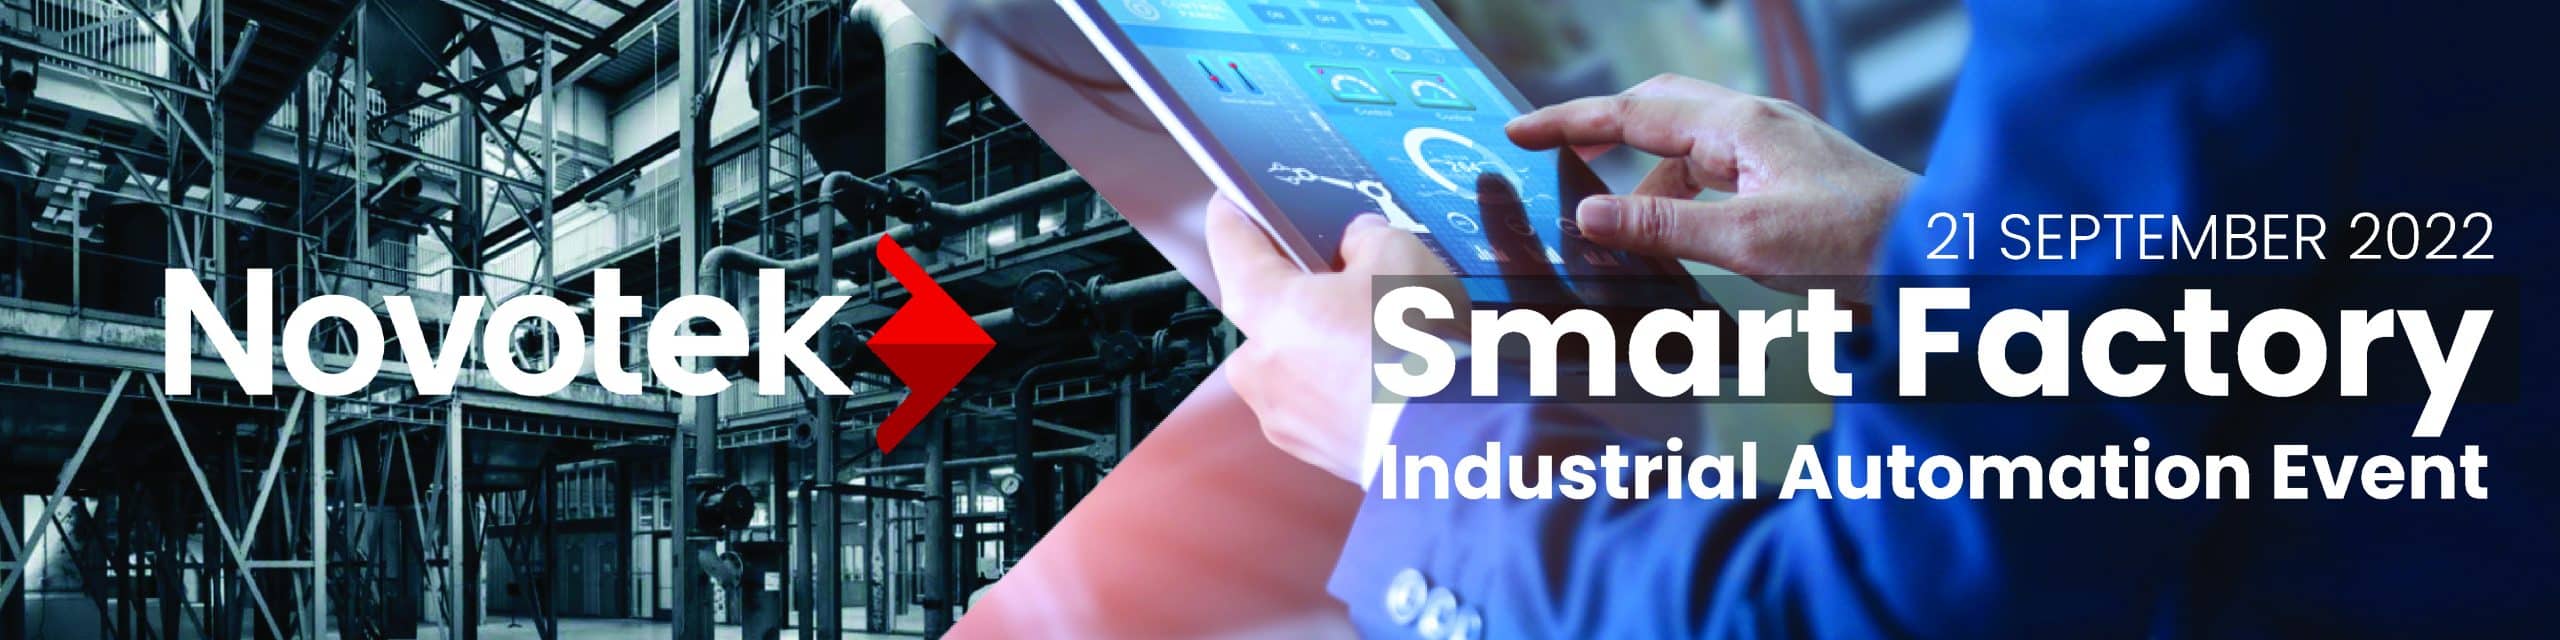 Industrial Automation Event - Smart Factory